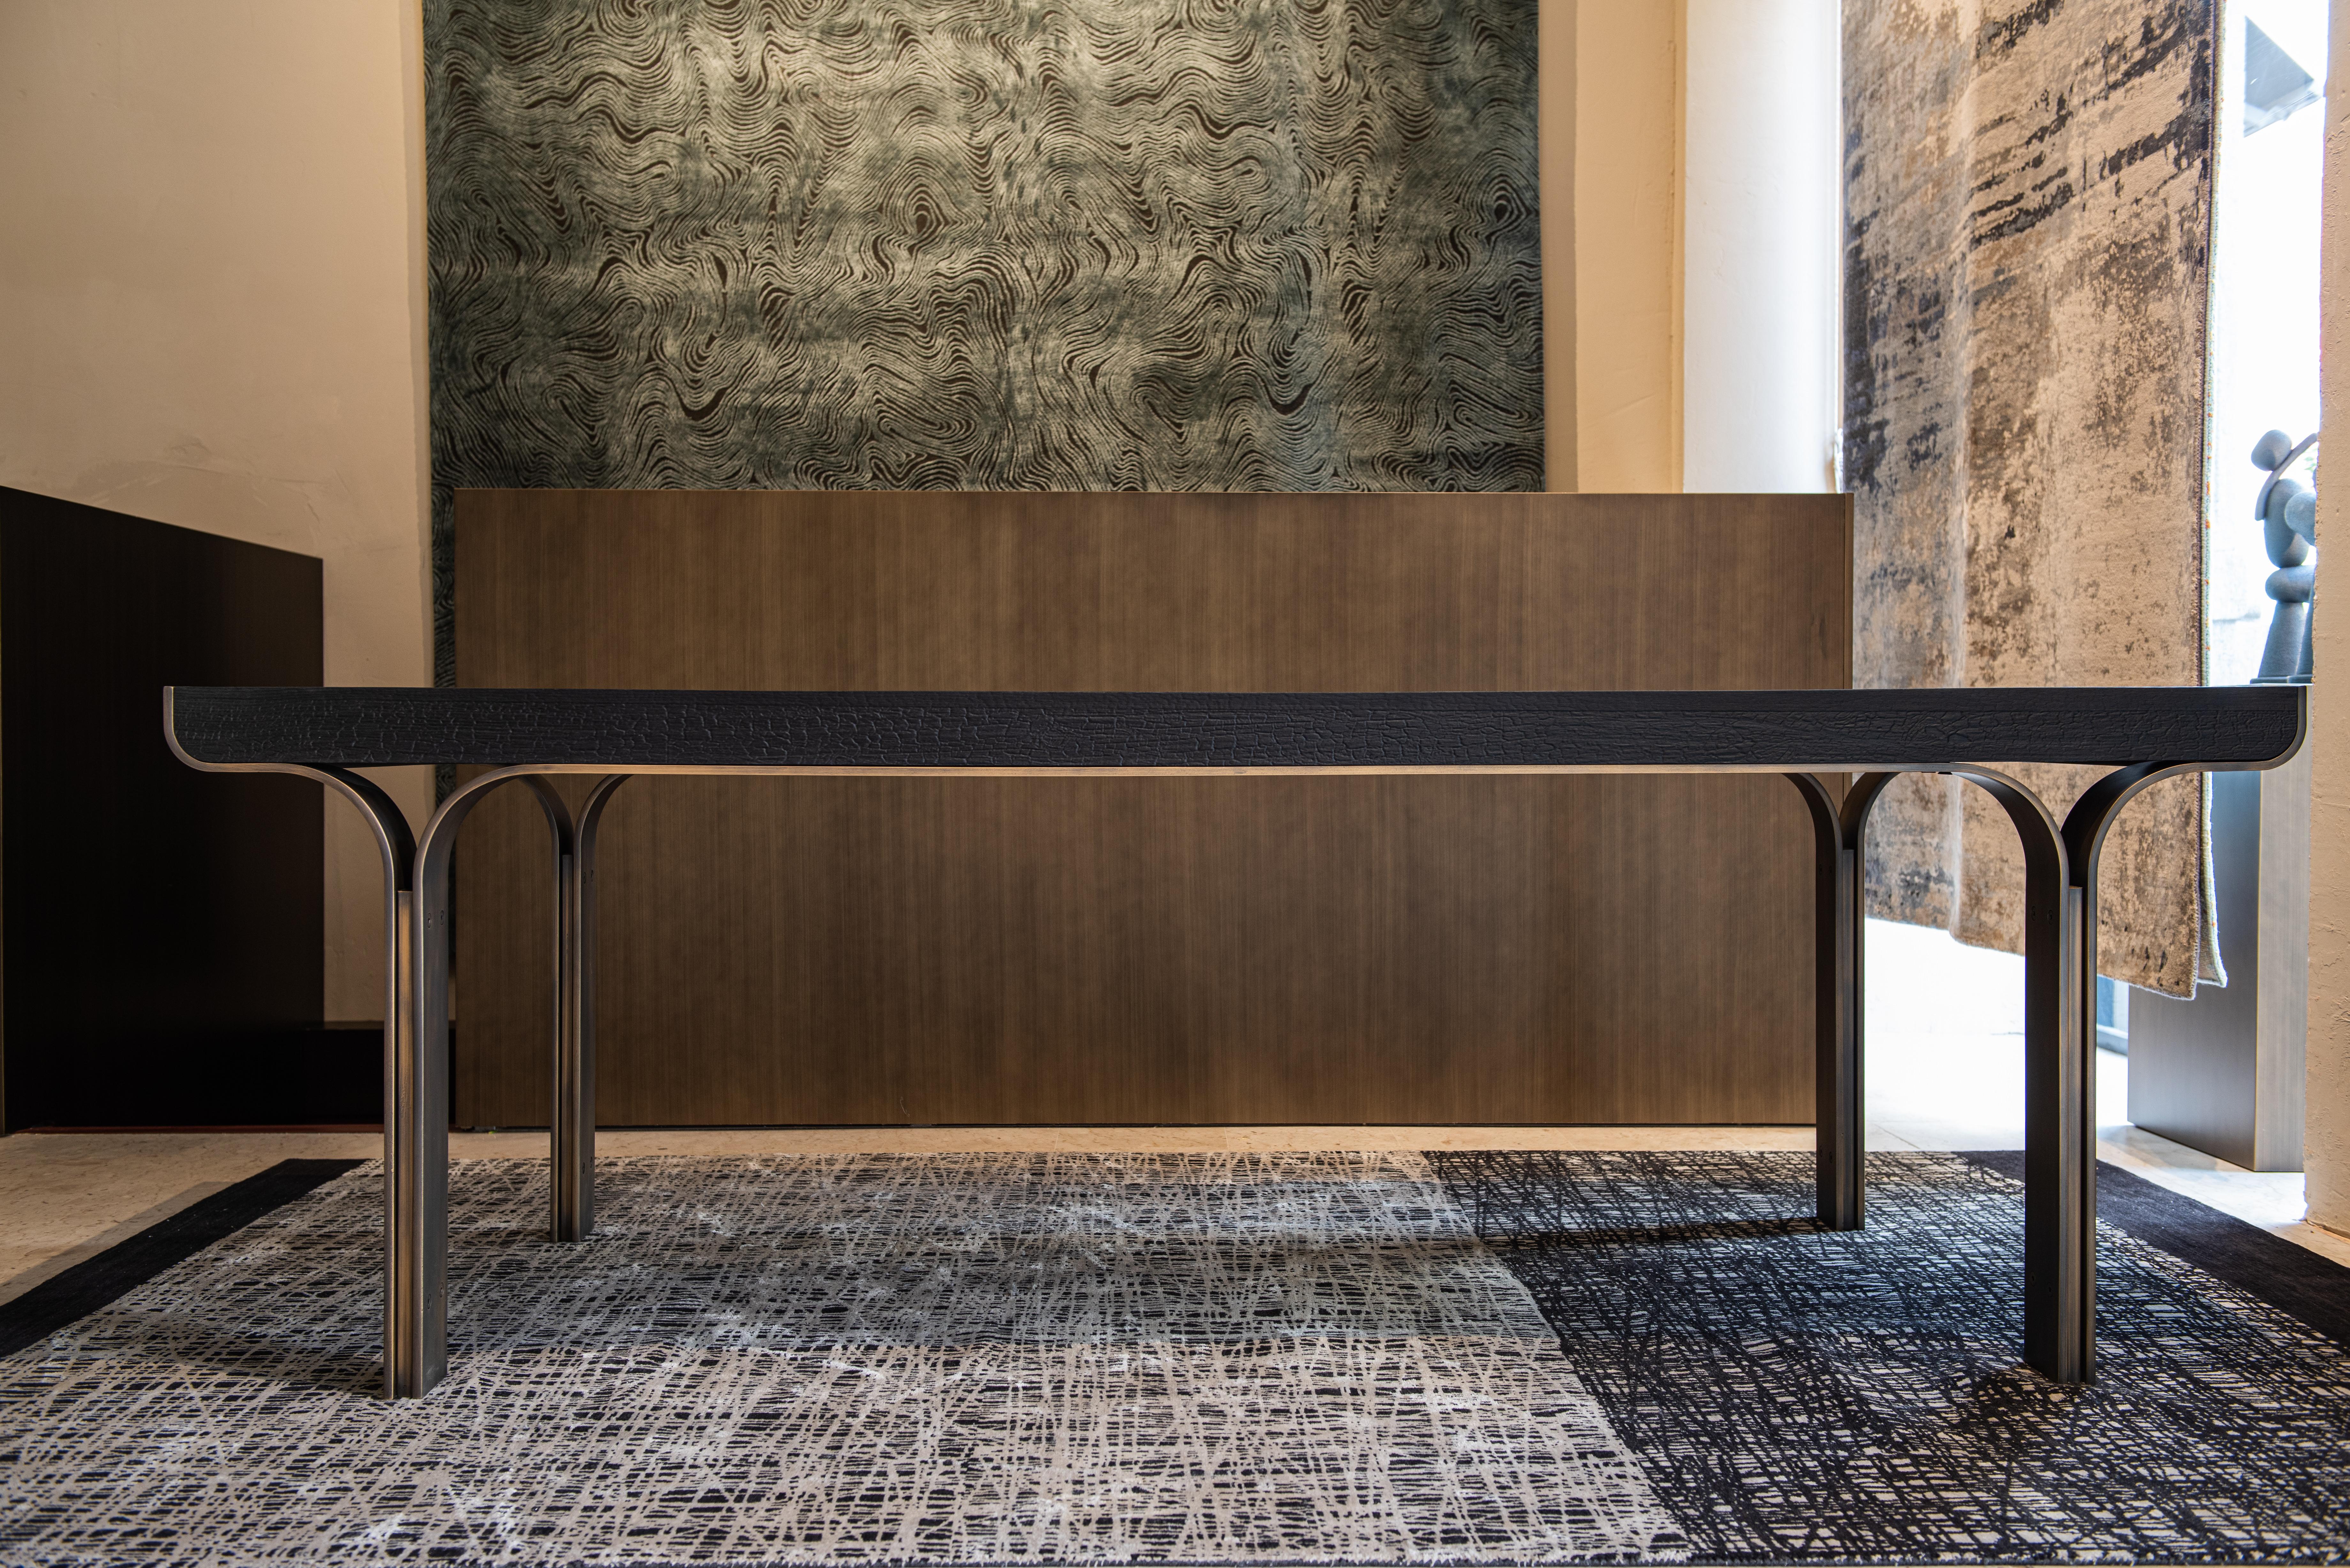 Osvaldo dining table by Delvis Unlimited.
Dimensions: D 90 x W 240 x H 76 cm.
Material: black burnt wood, burnished iron brassed.

The Osvaldo table, designed by Fabio Fantolino, is like a dance of shapes and materials. The steel structure,